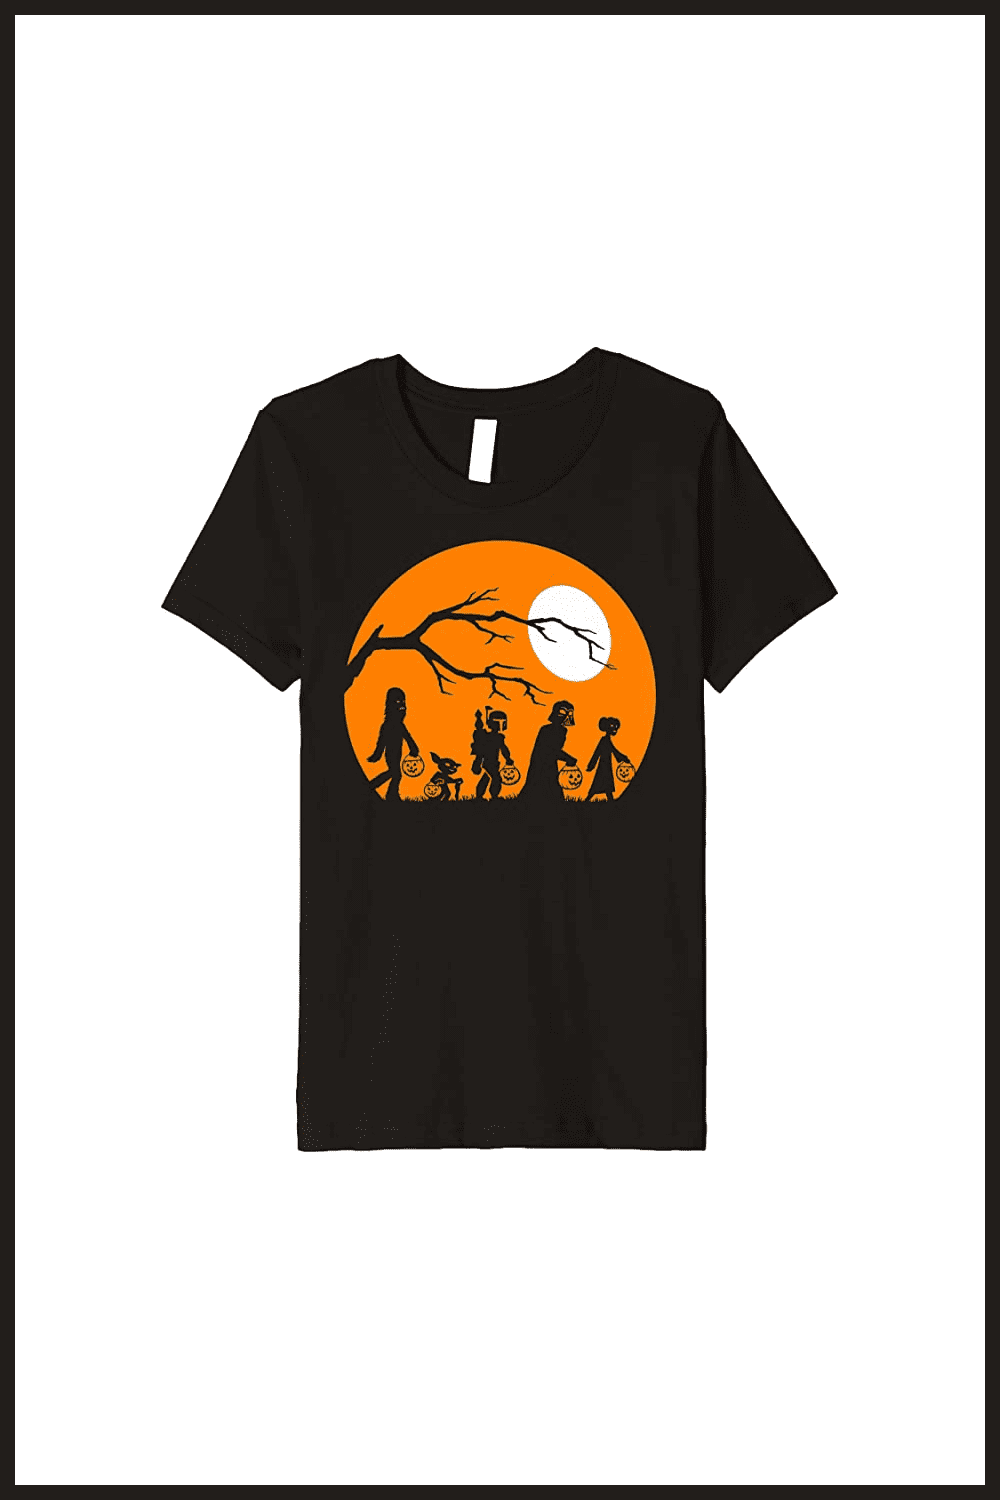 Check Cool 2022: Halloween T-Shirt out Best Designs 130+ Shirts